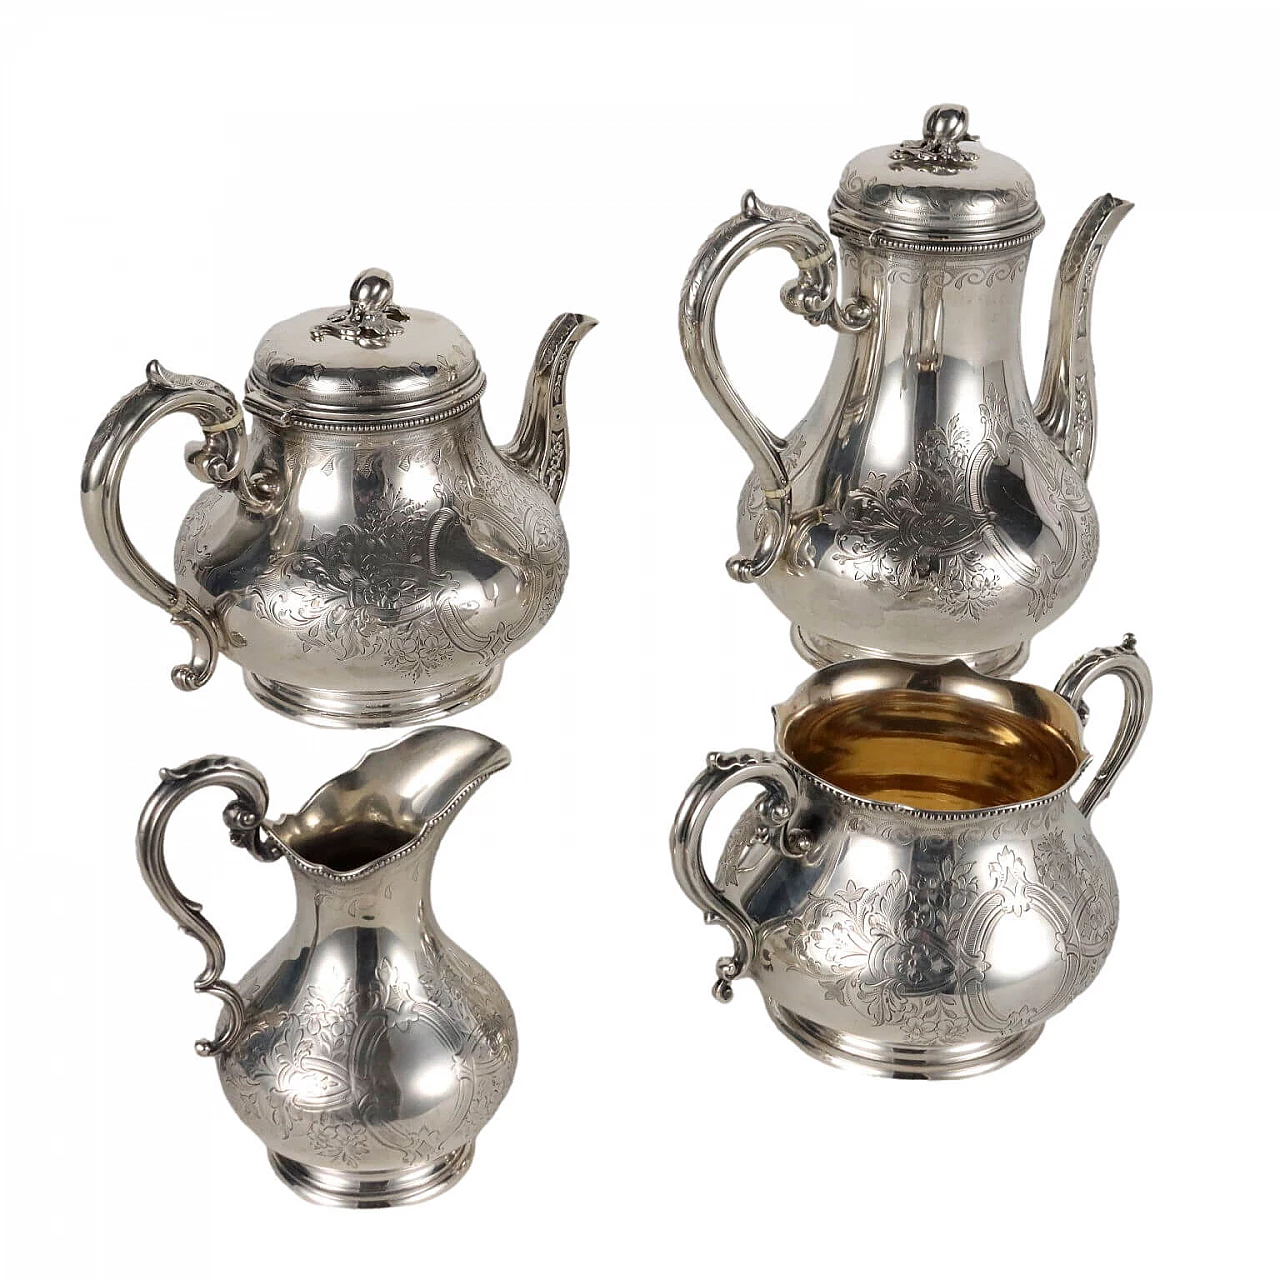 Tea and coffee service in 925 sterling silver by Martin Hall & Co, 1950s 1